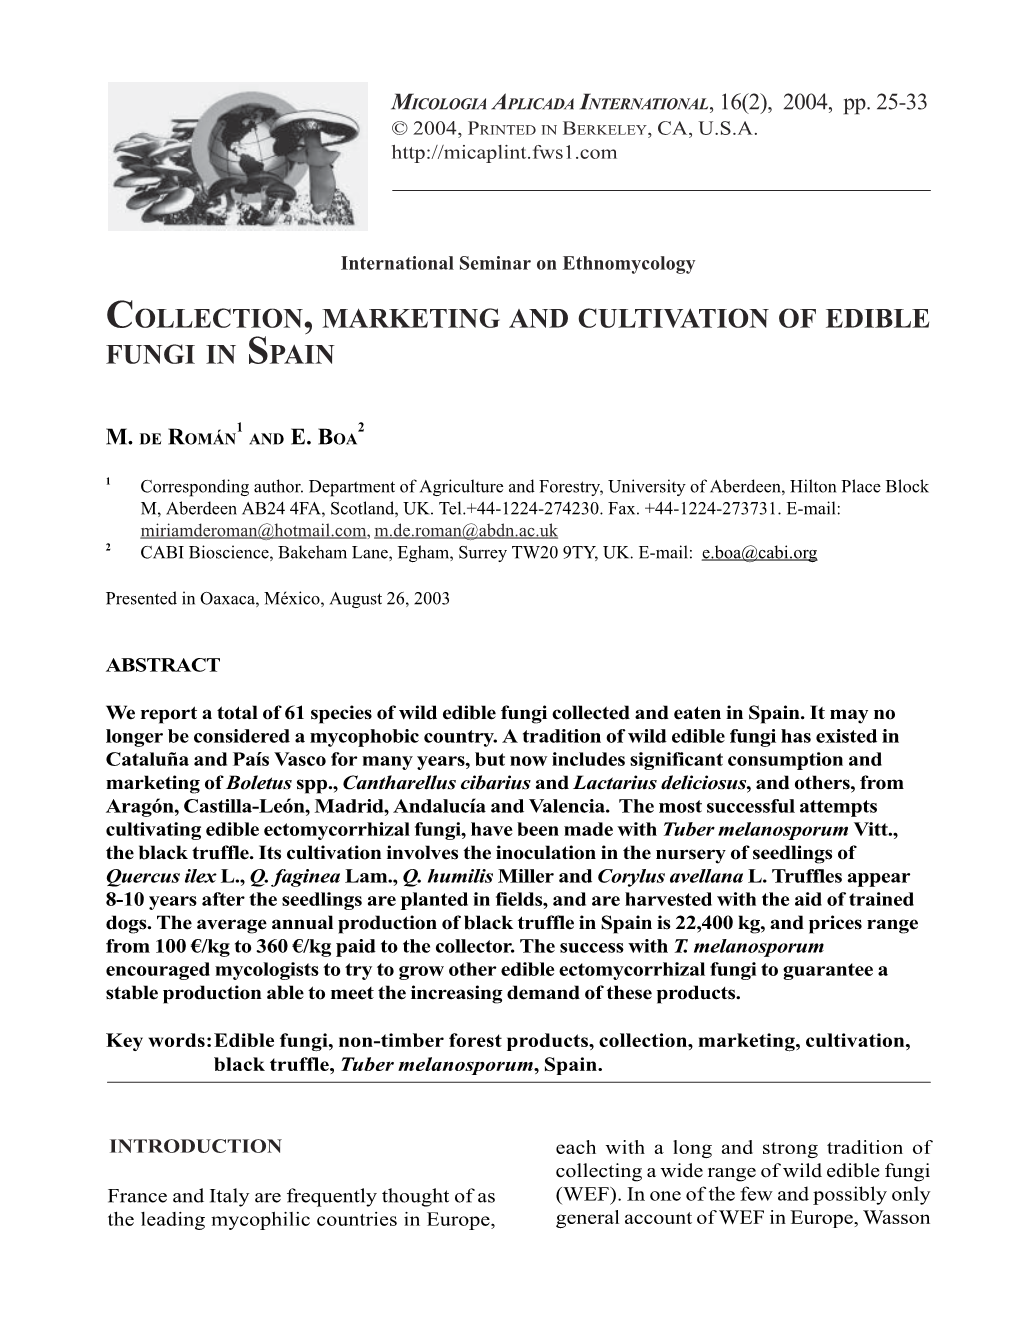 Collection, Marketing and Cultivation of Edible Fungi in Spain